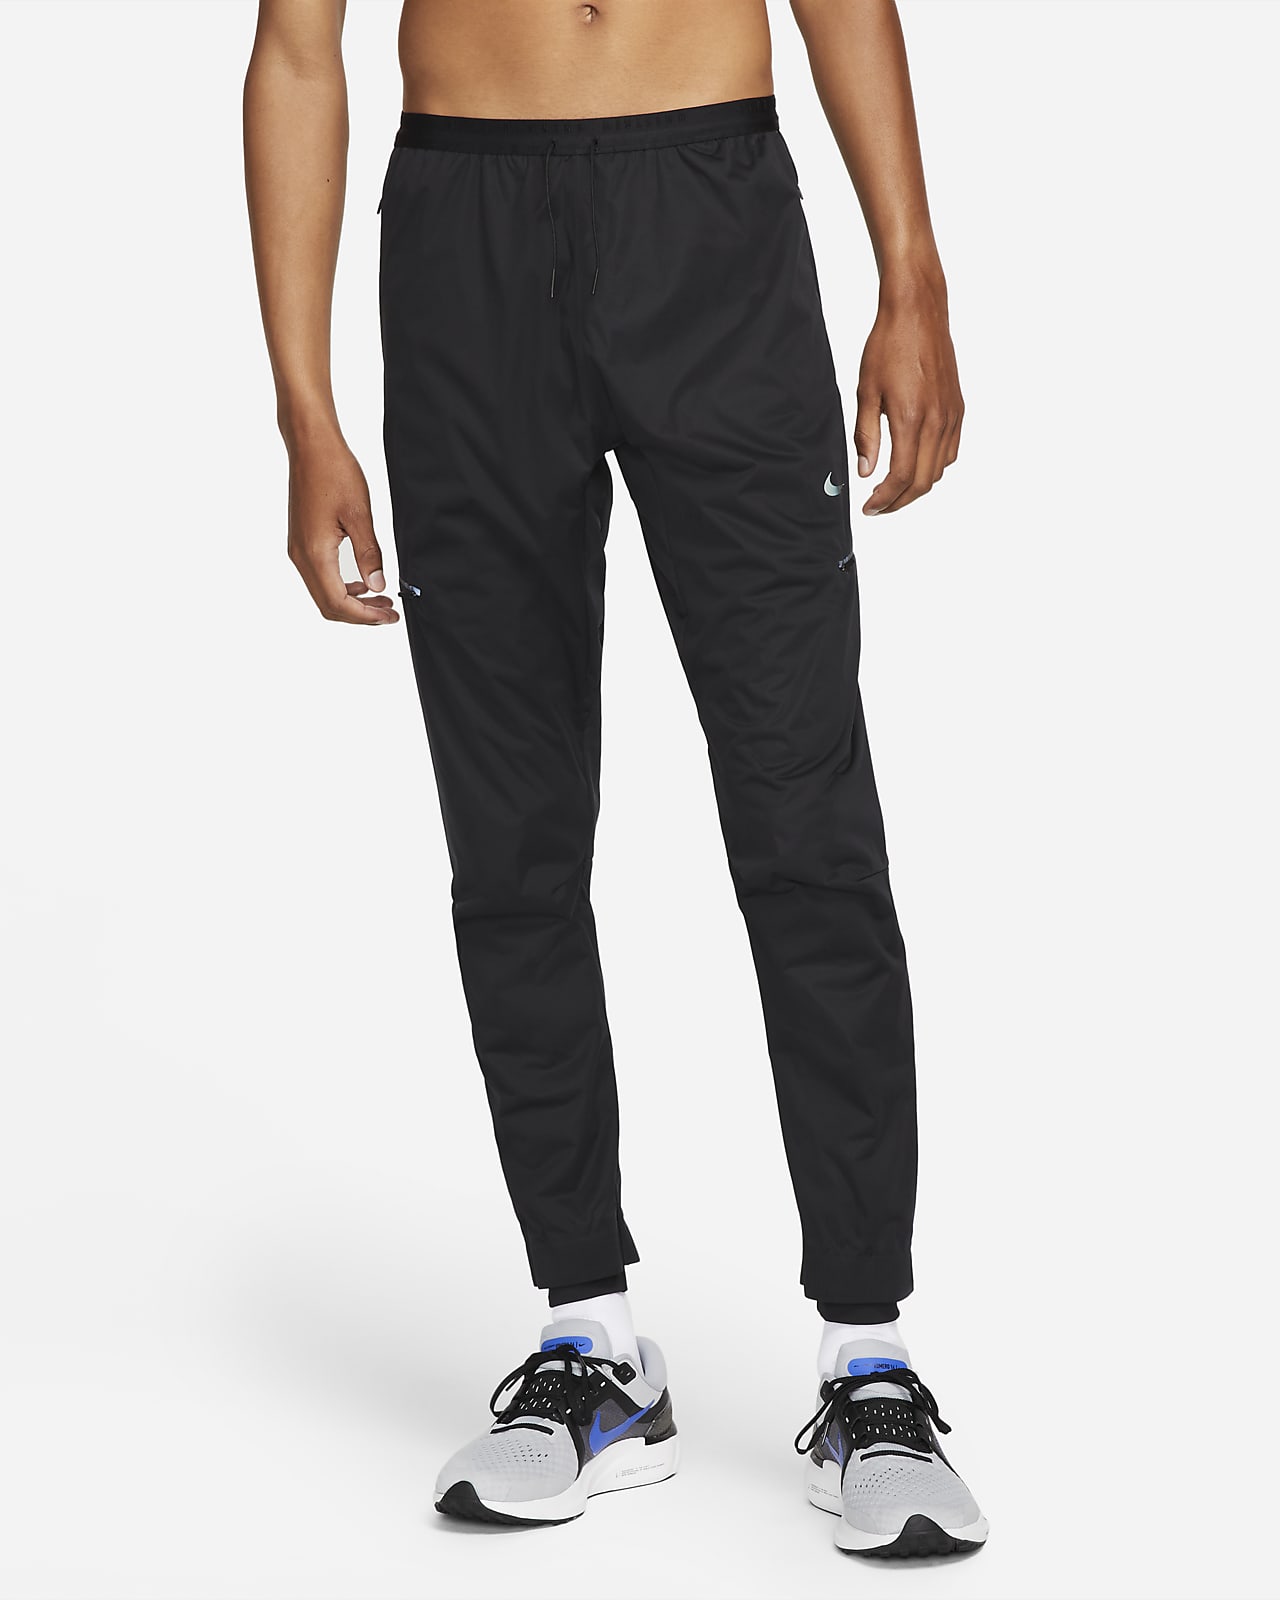 Nike Storm-FIT ADV Run Division Men's Running Trousers